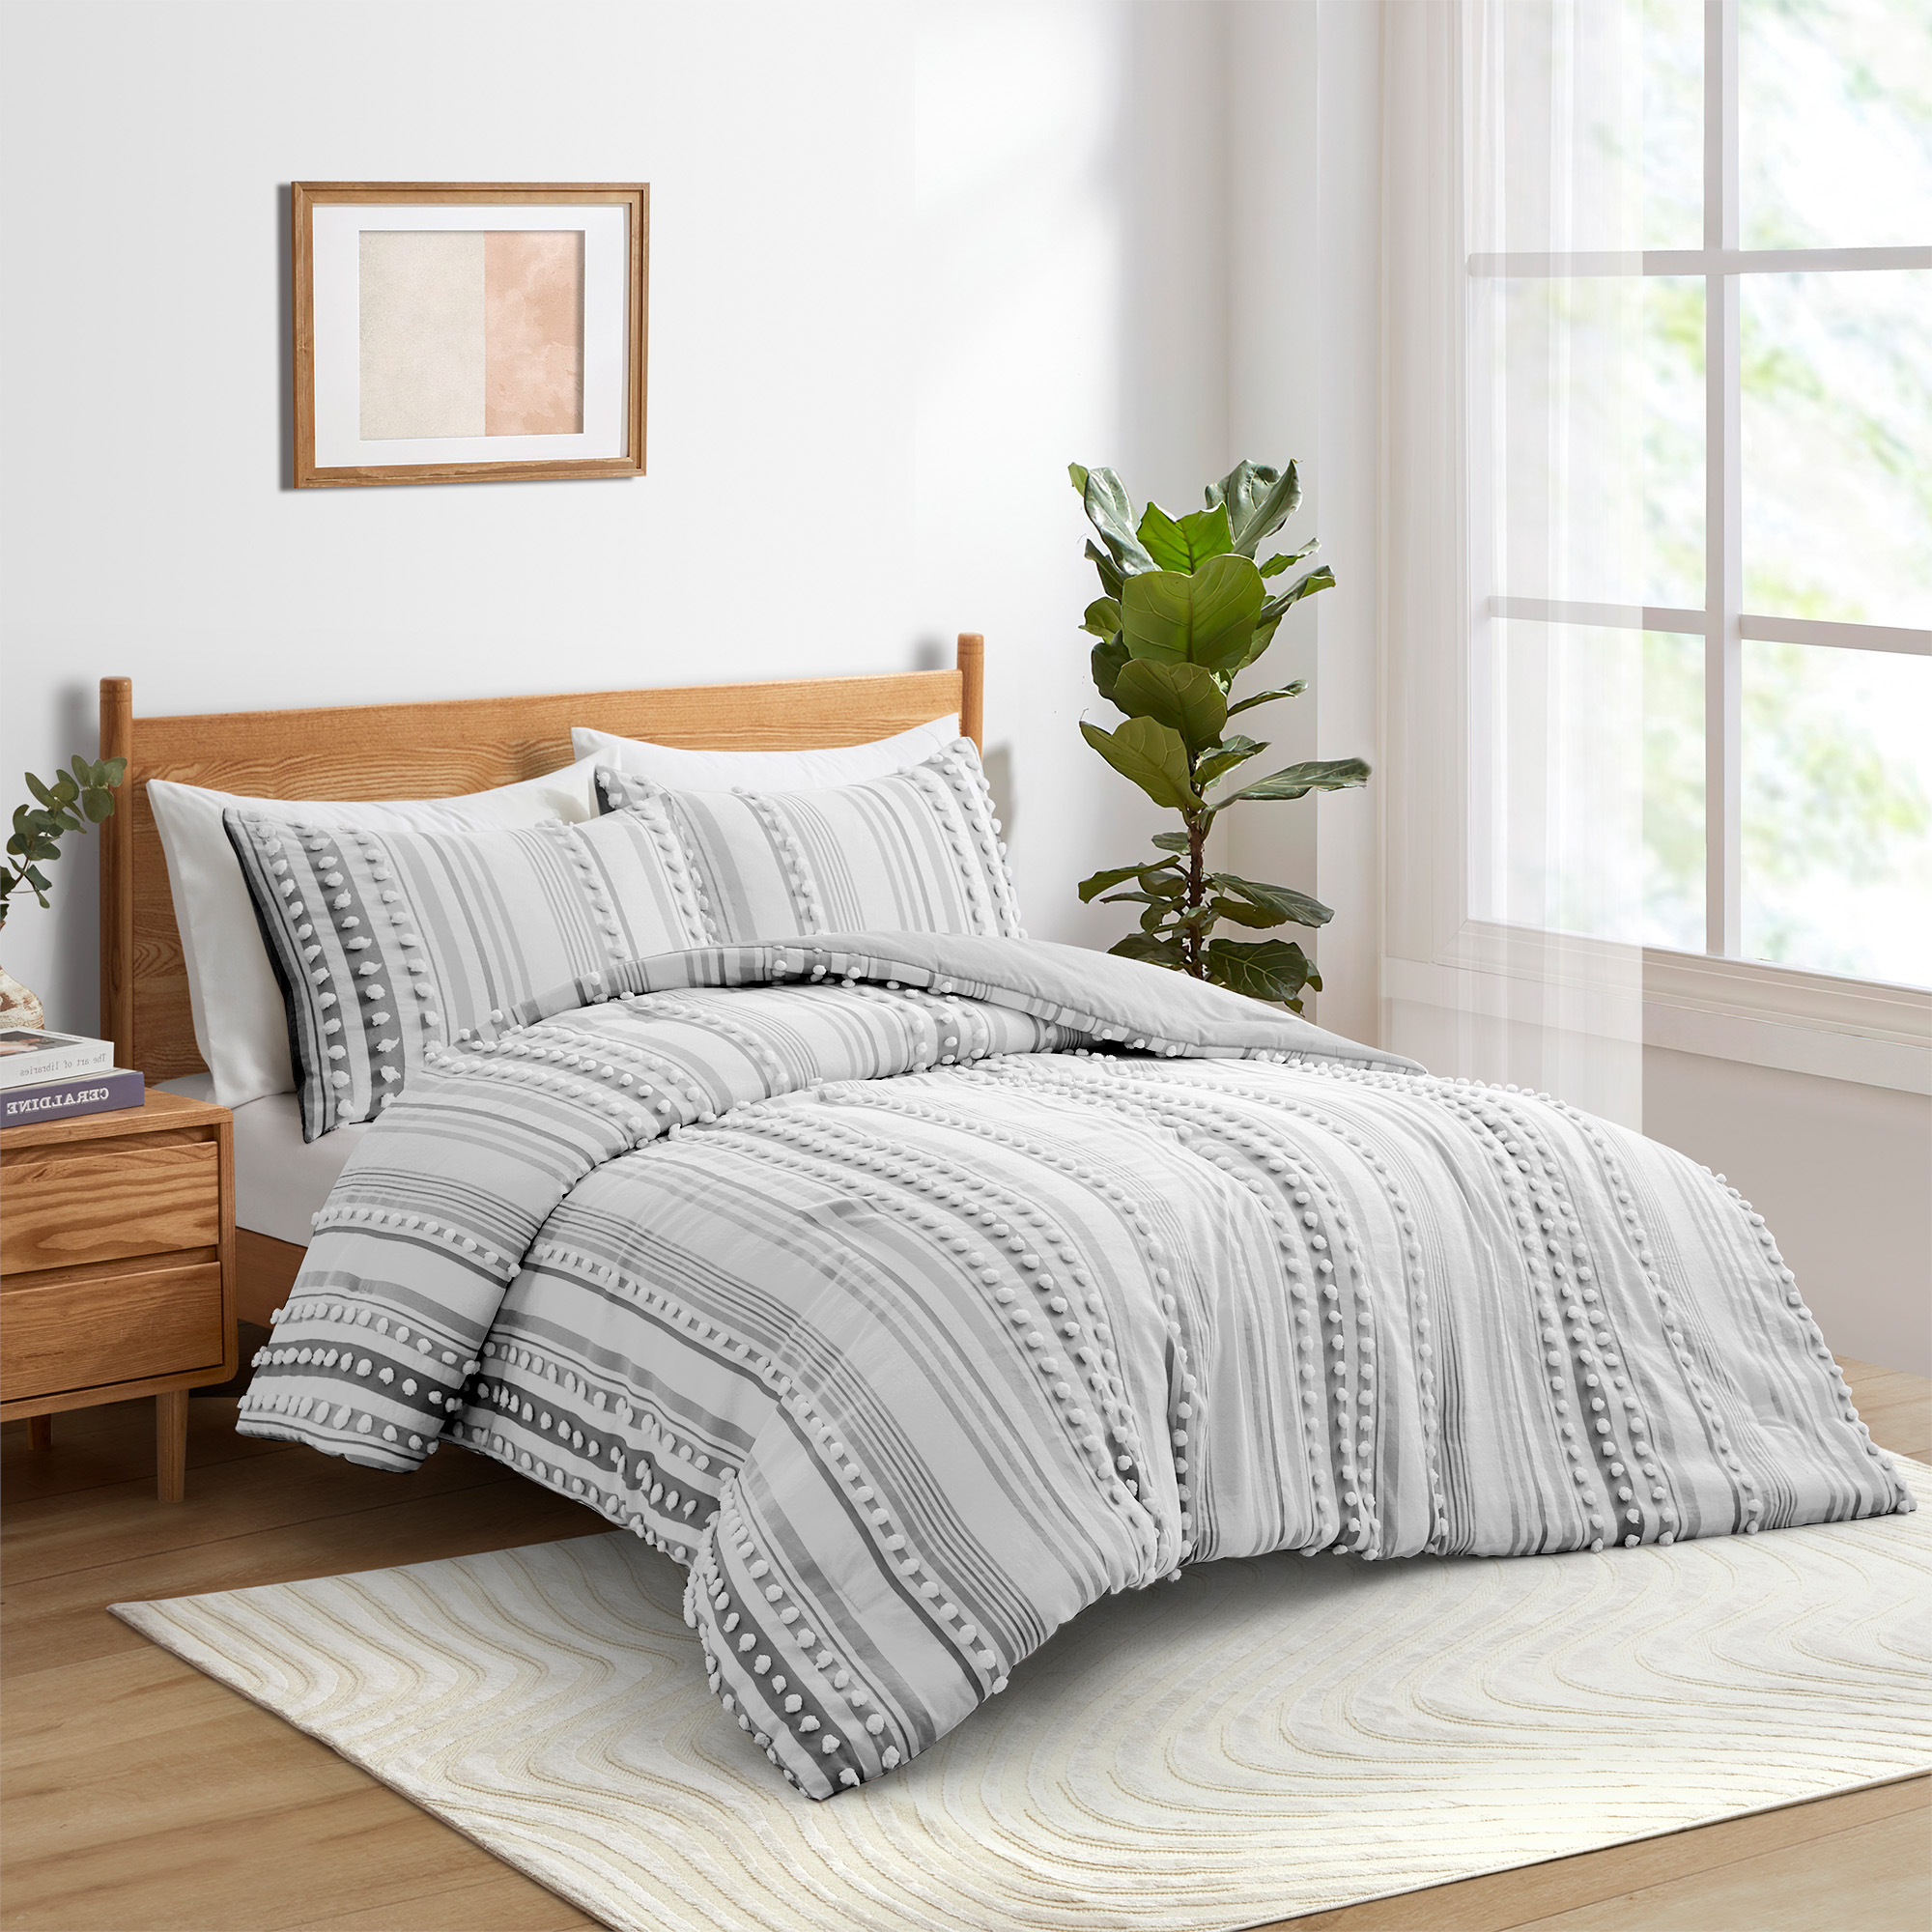 Pom Pom Textured Bed Set, All Season Soft Microfiber Complete Bedding Set For All Season Warmth - Full/Queen Size